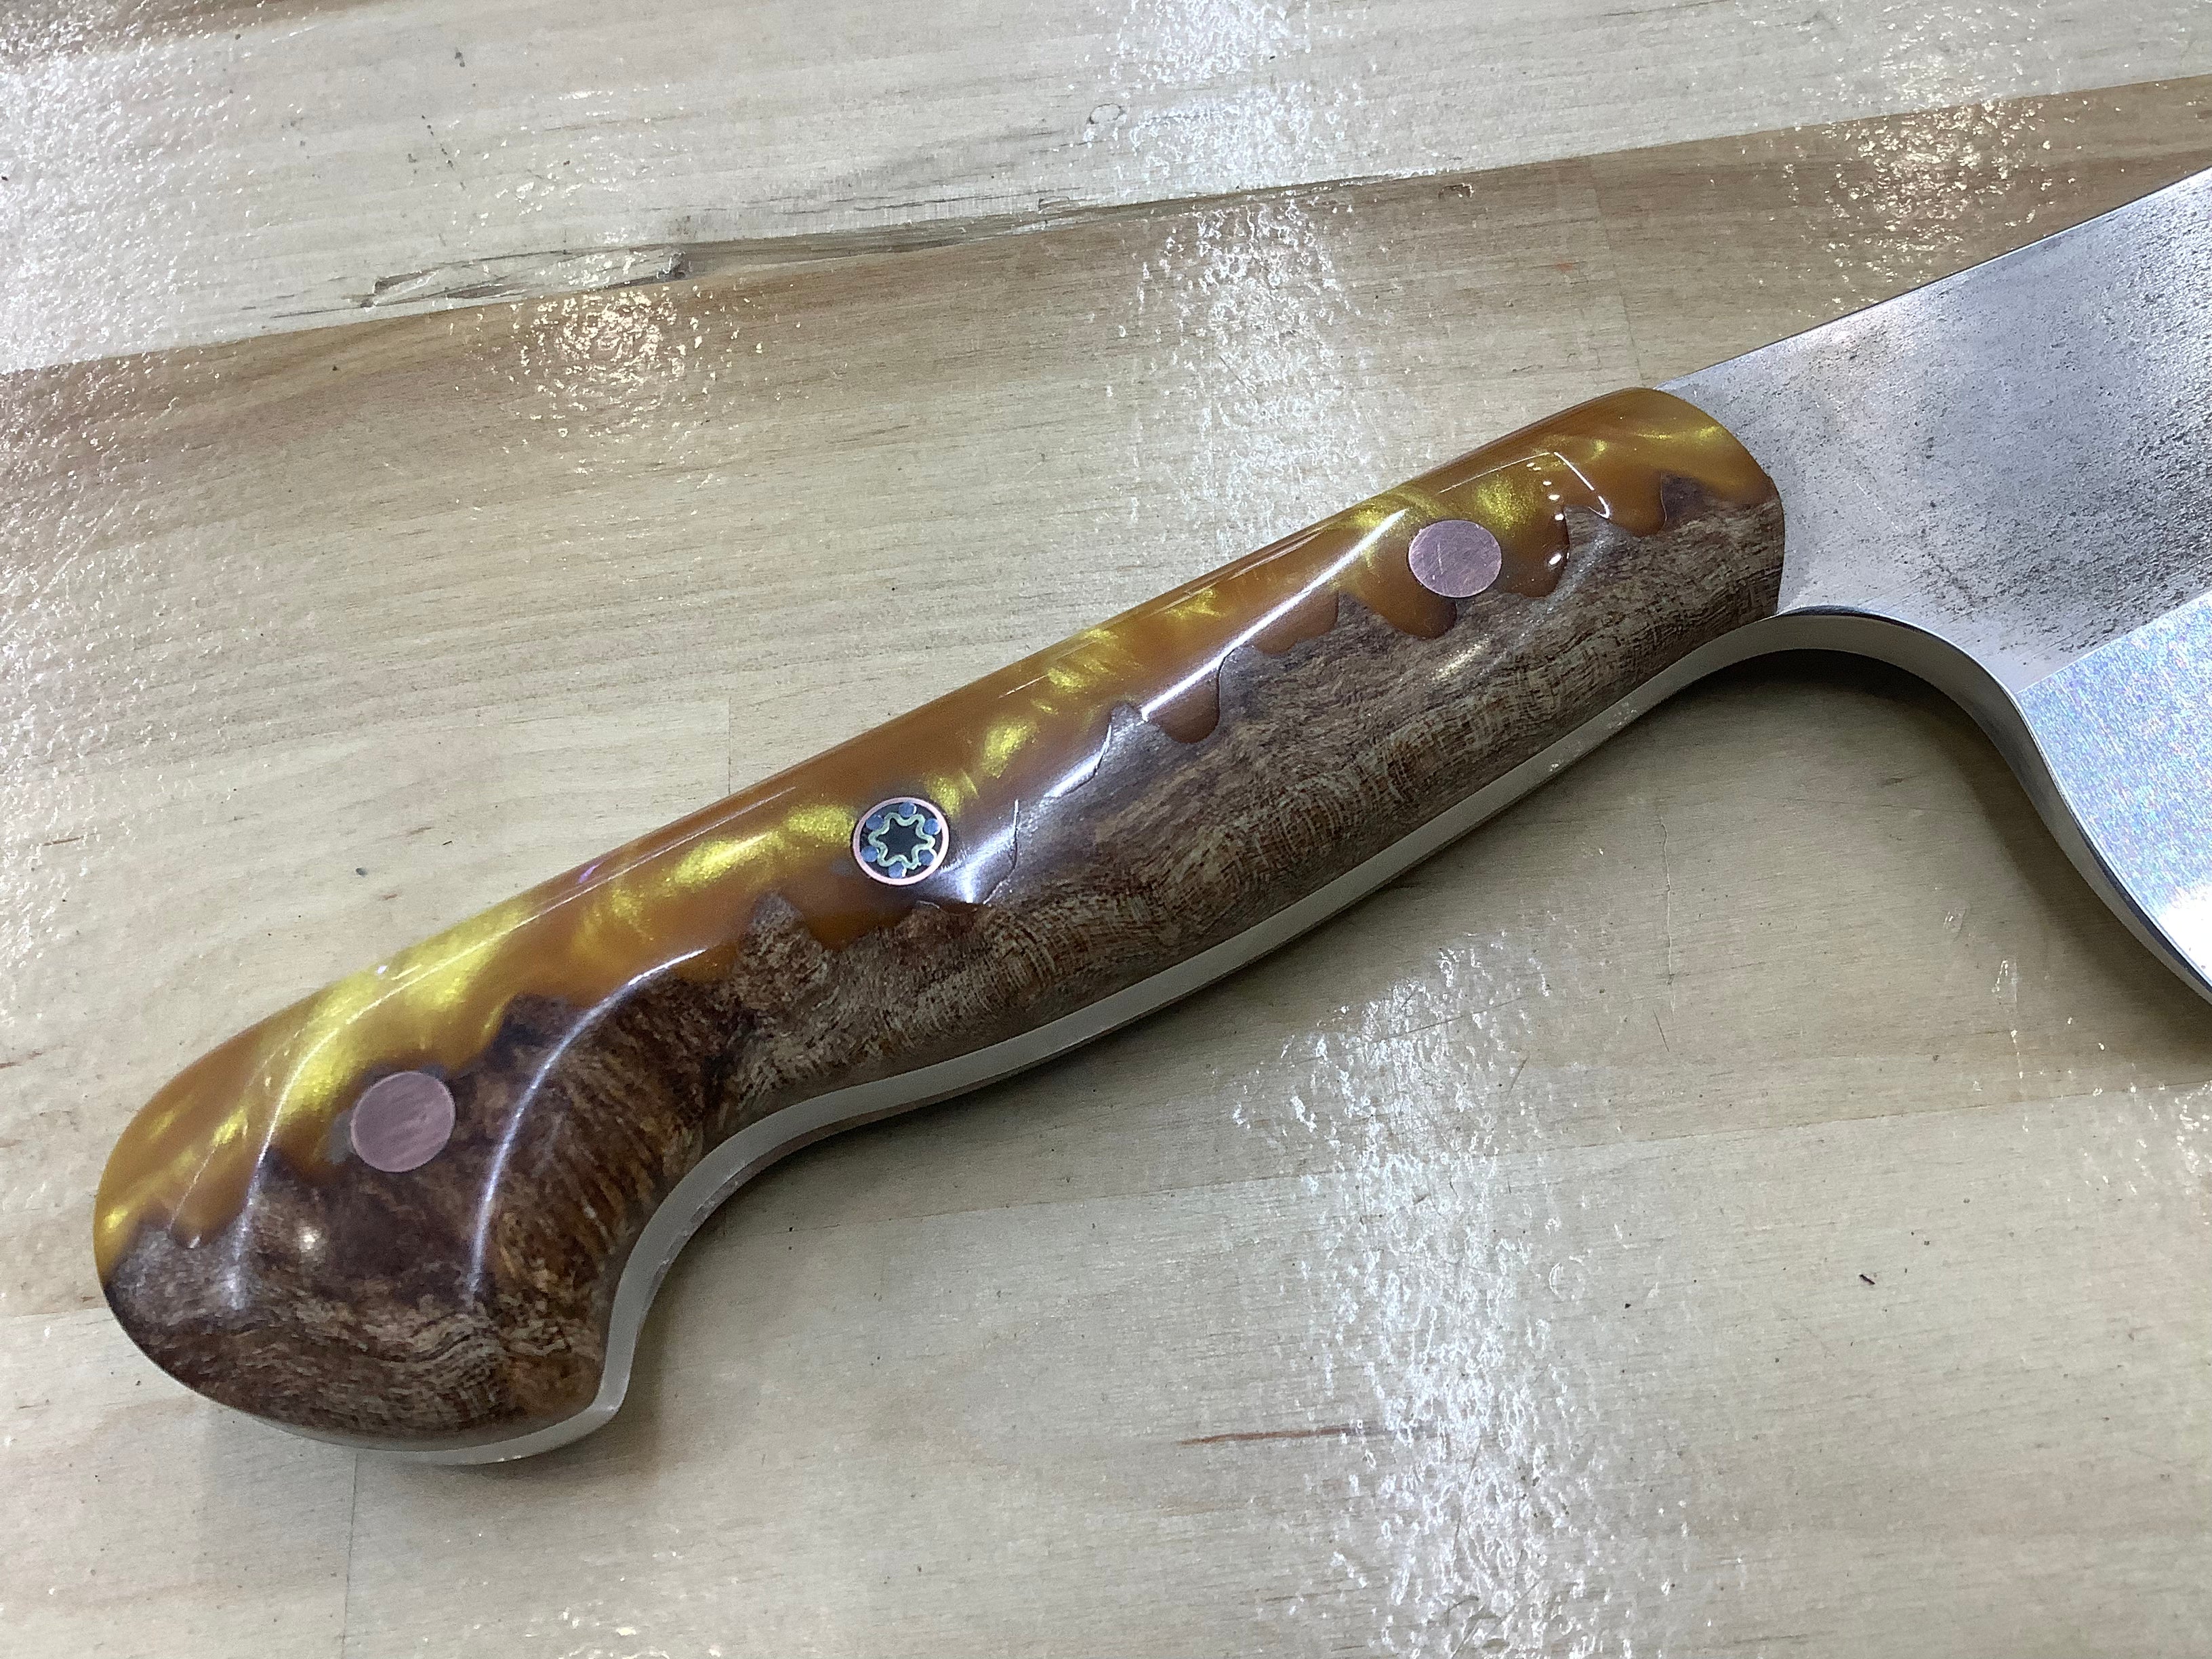 Western Style Cleaver in CPM MagnaCut with an AAO Maple & Gold Resin Hybrid Handle